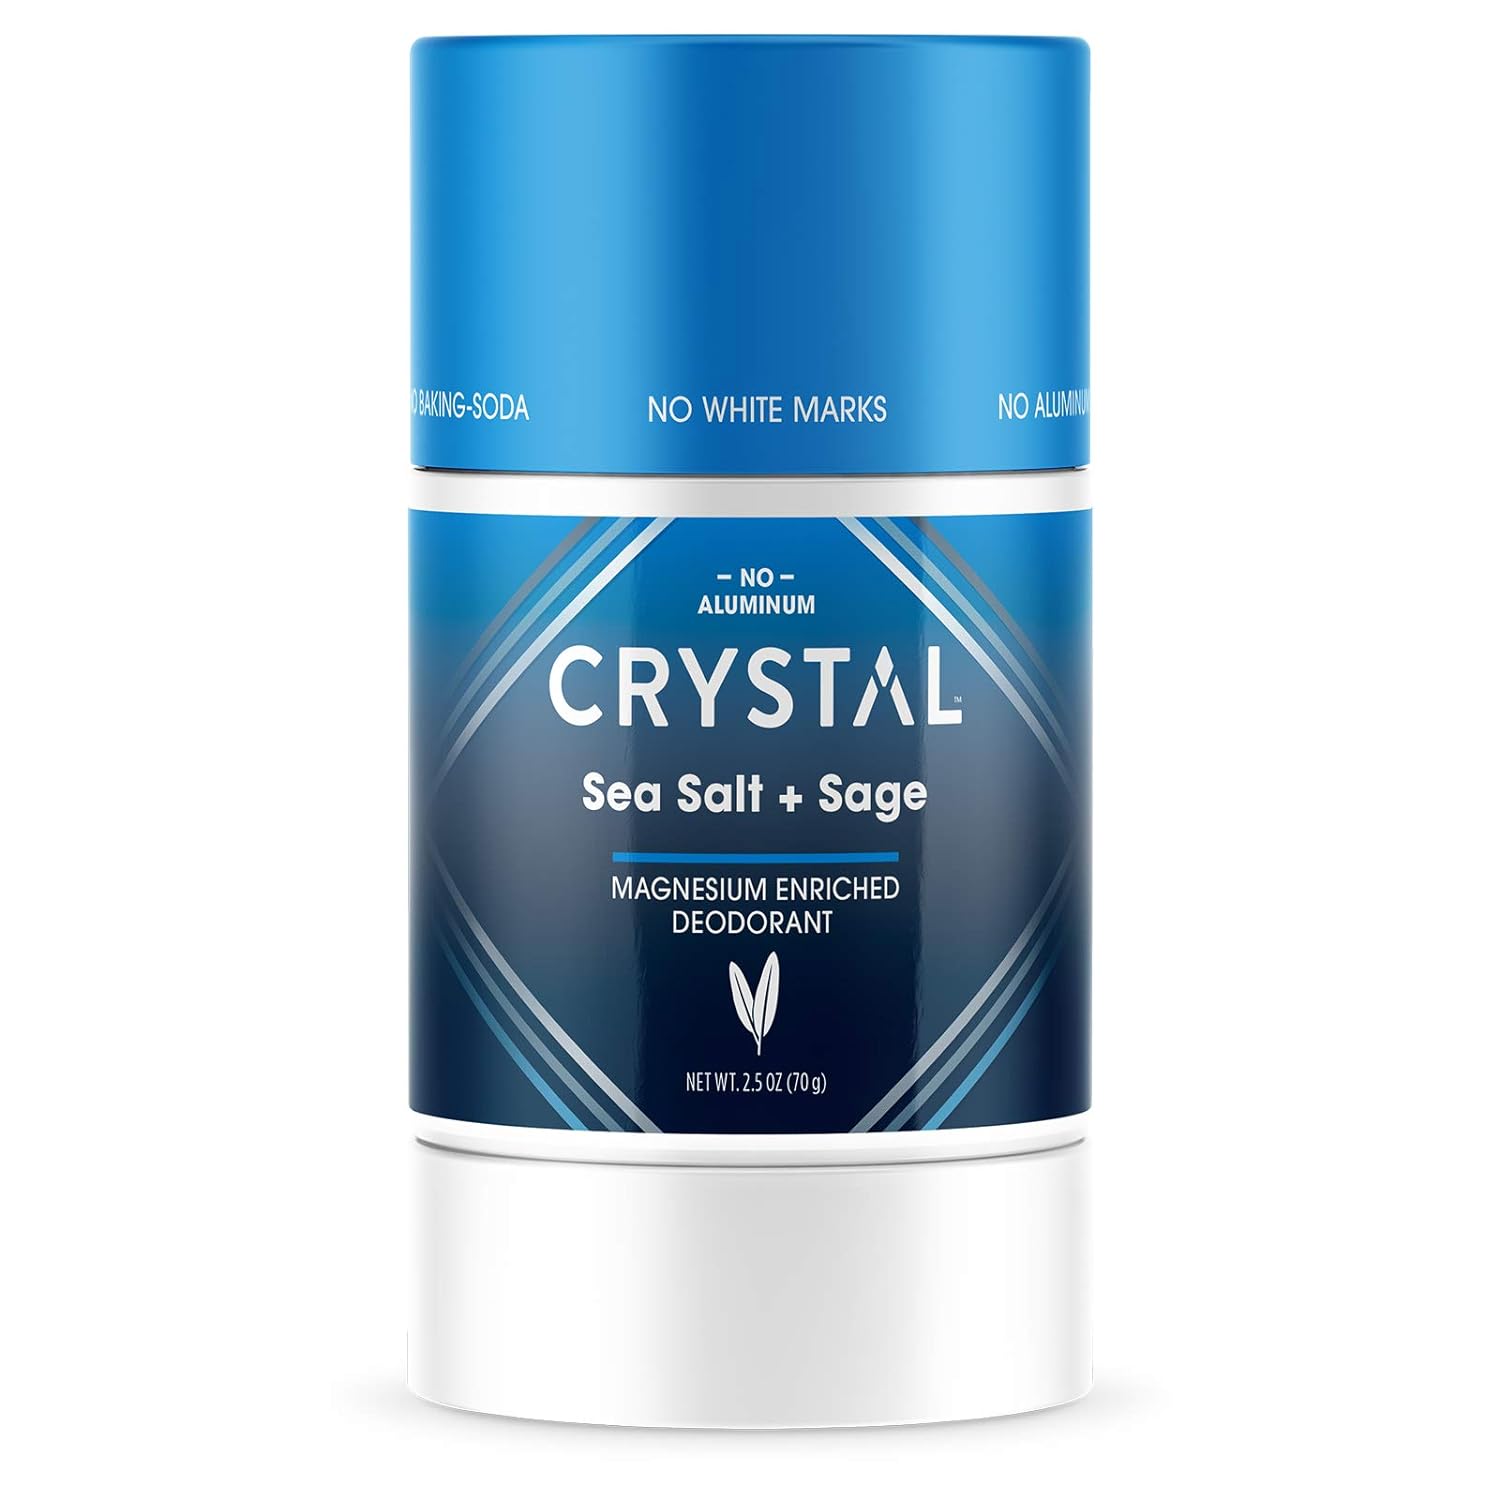 Crystal Magnesium Solid Stick Natural Deodorant, Non-Irritating Aluminum Free Deodorant for Men or Women, Safely and Effectively Fights Odor, Baking Soda Free, Sea Salt + Sage, 2.5 oz